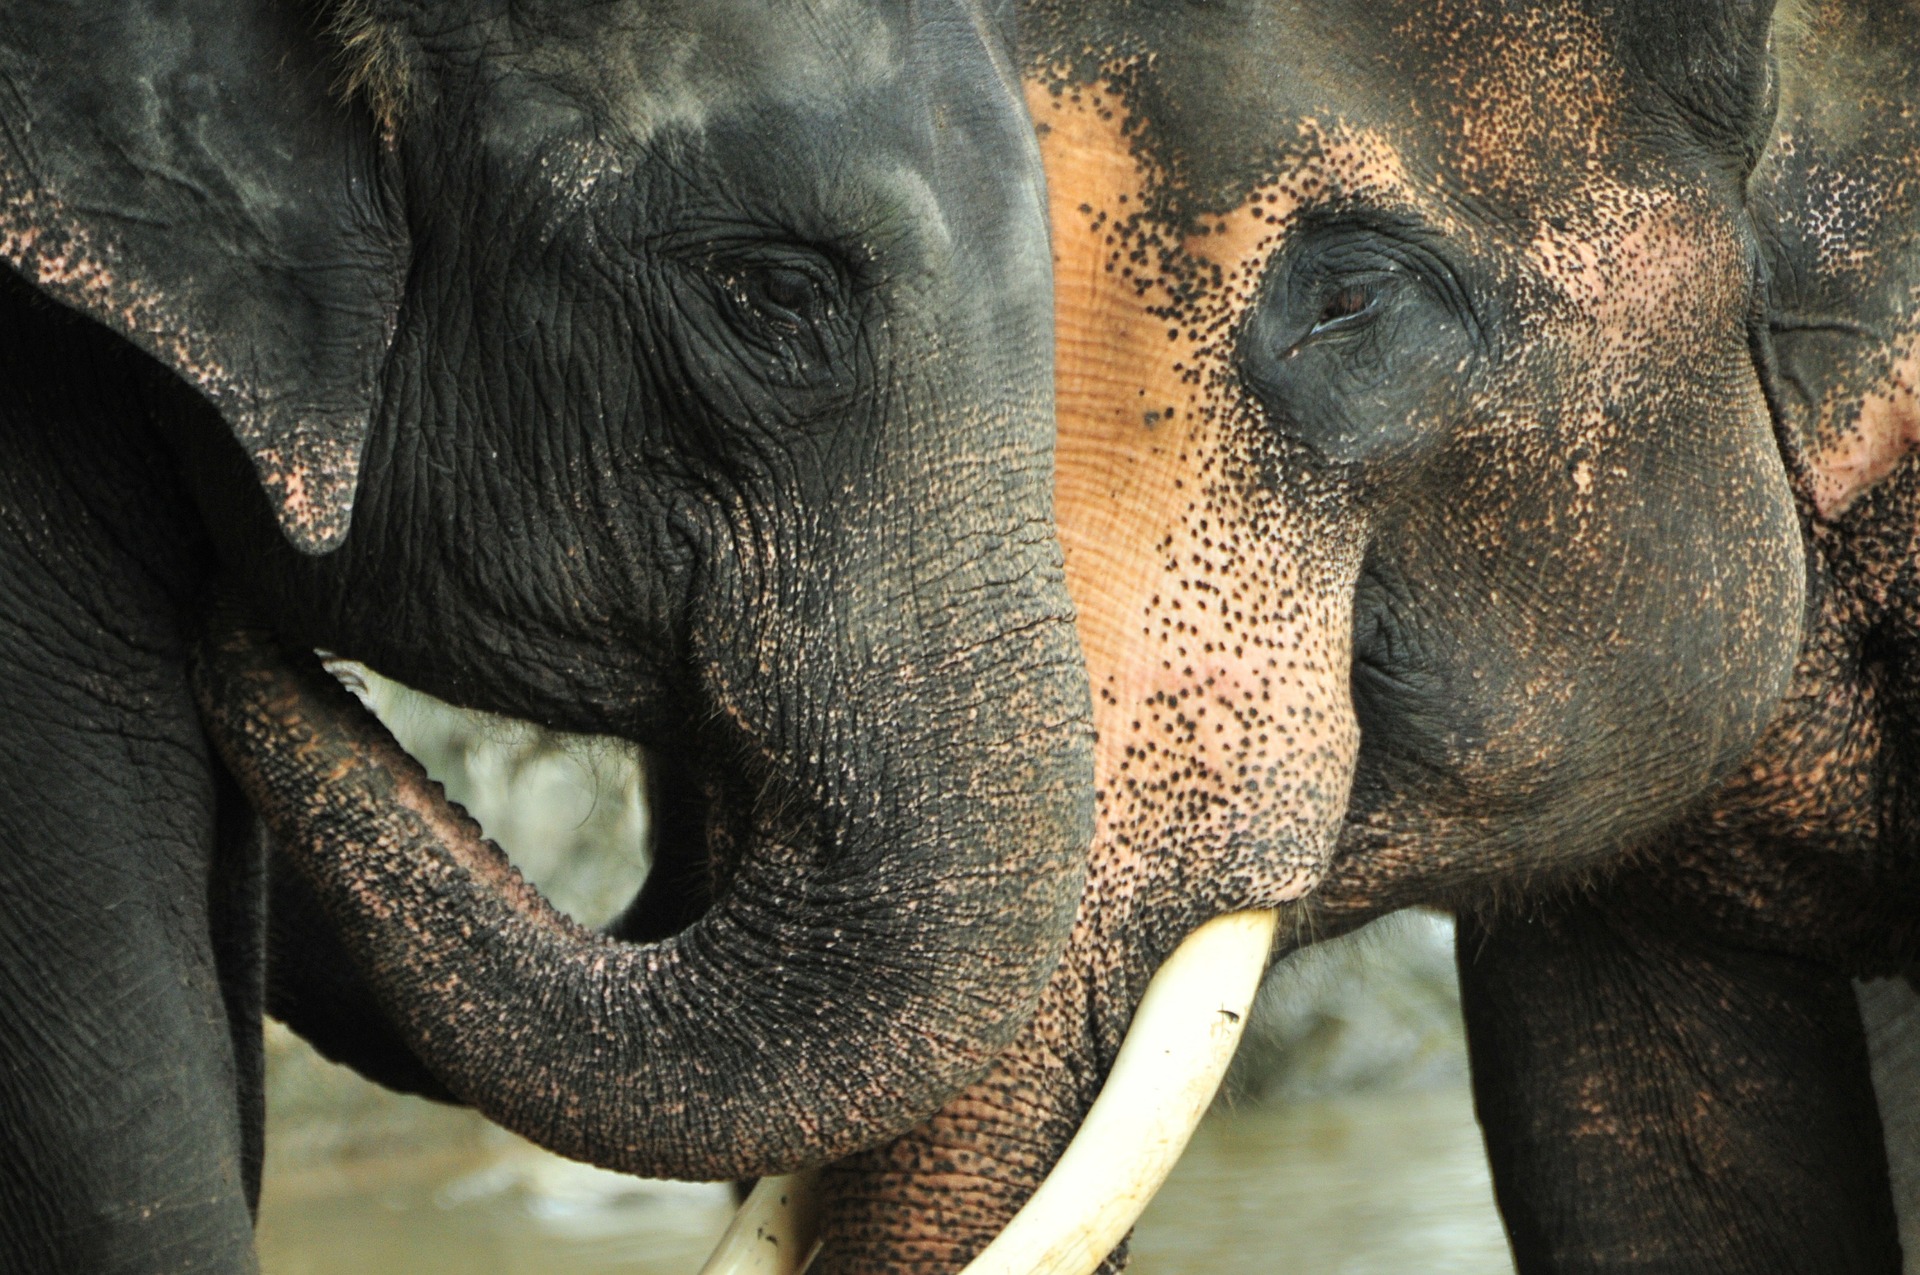 15 amazing facts you probably didn’t know about Elephants